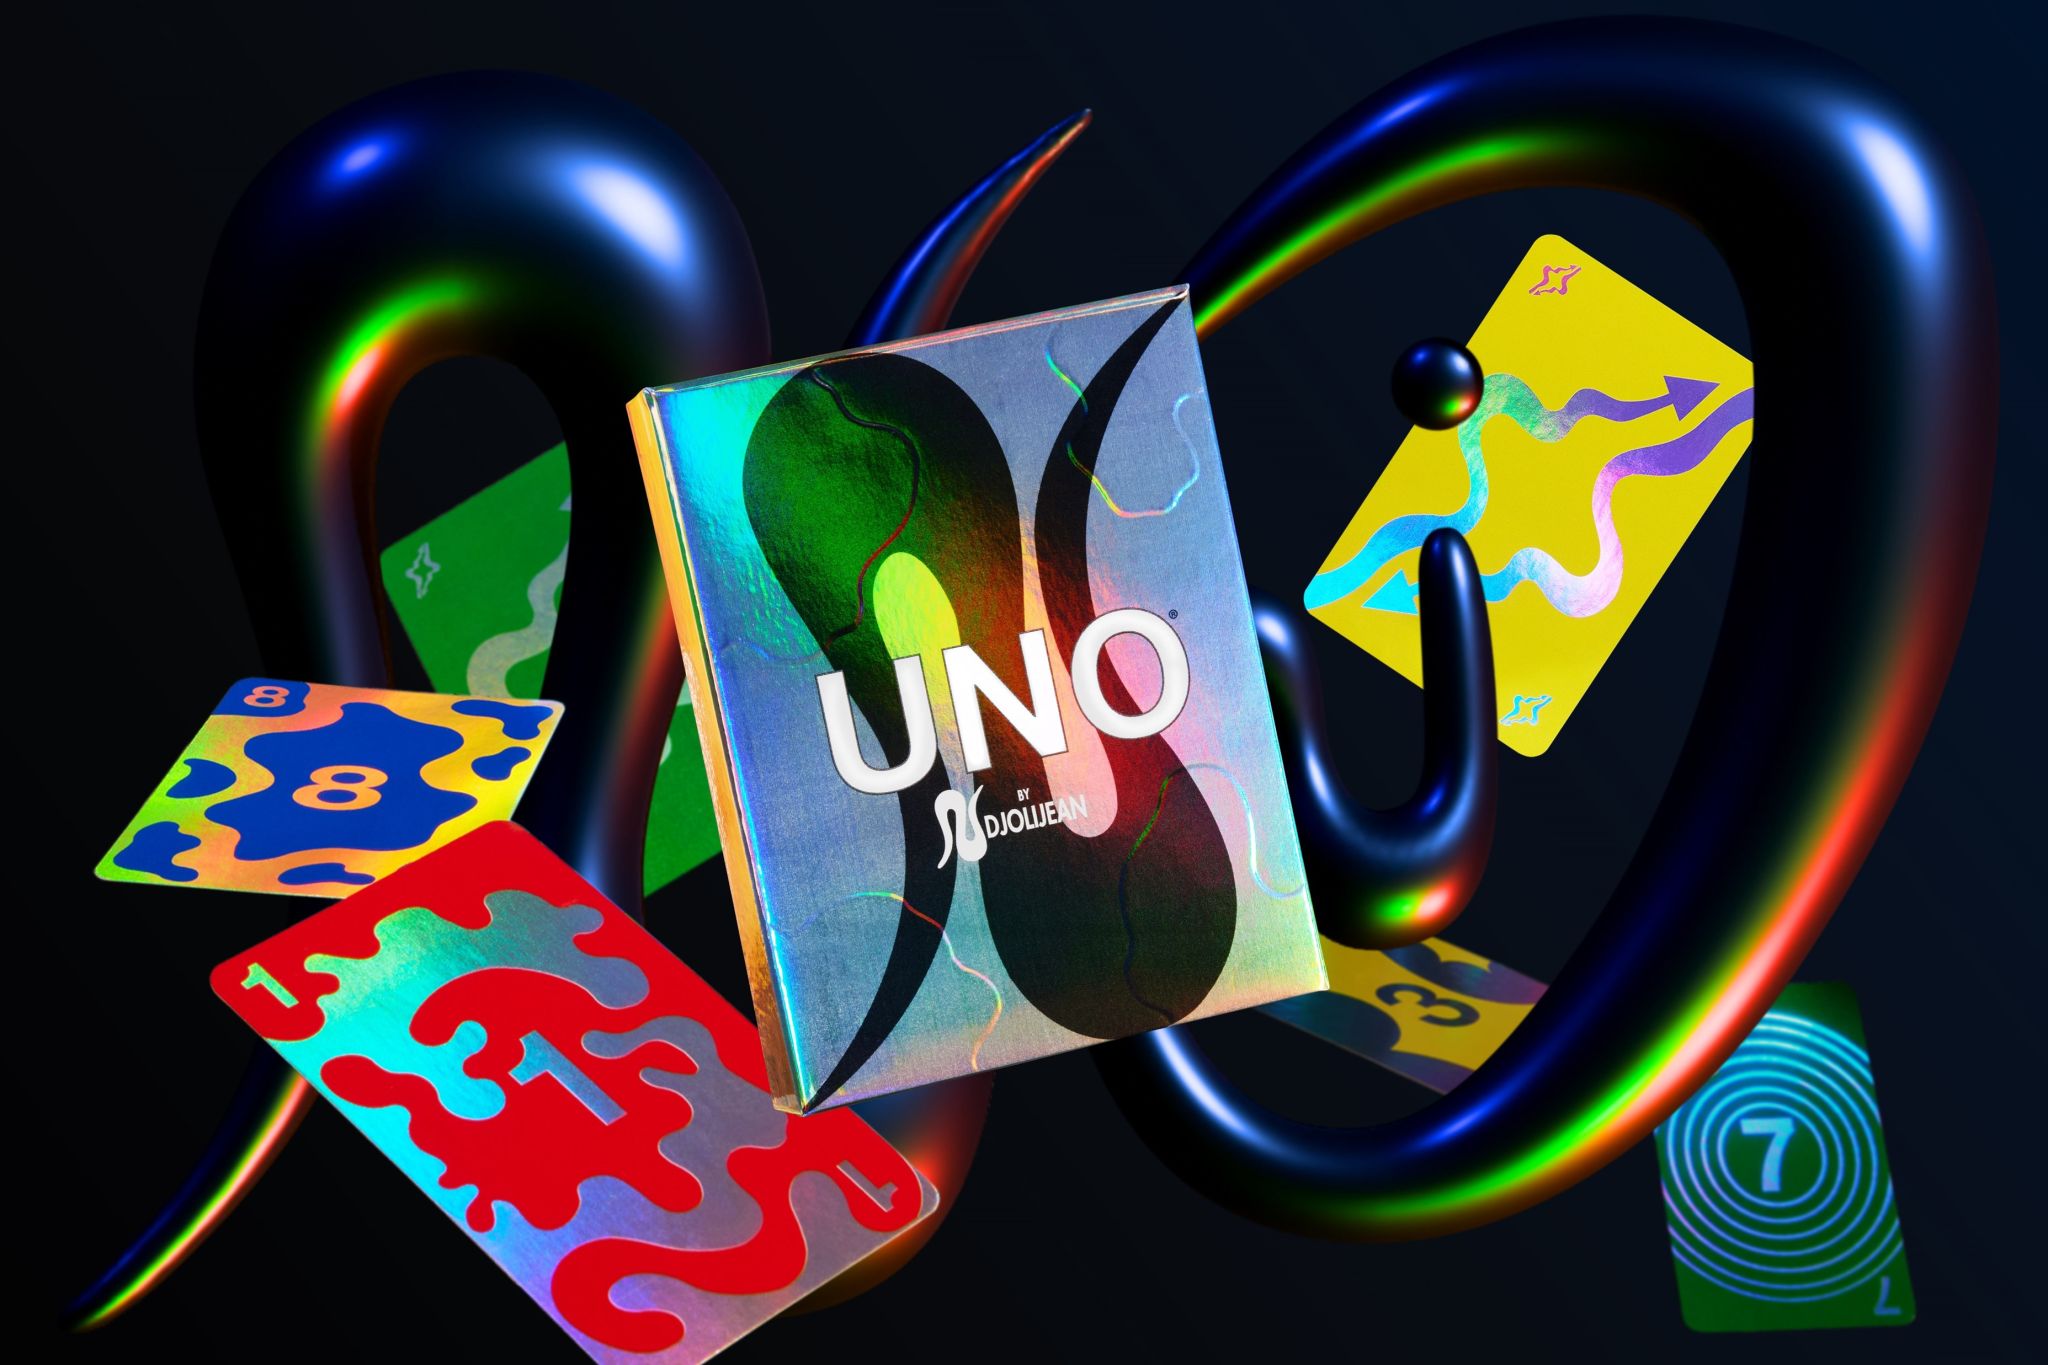 UNO Presents Its Shiniest Artist Collab Yet with a Trippy Holographic Deck from Jean Jacques N’djoli